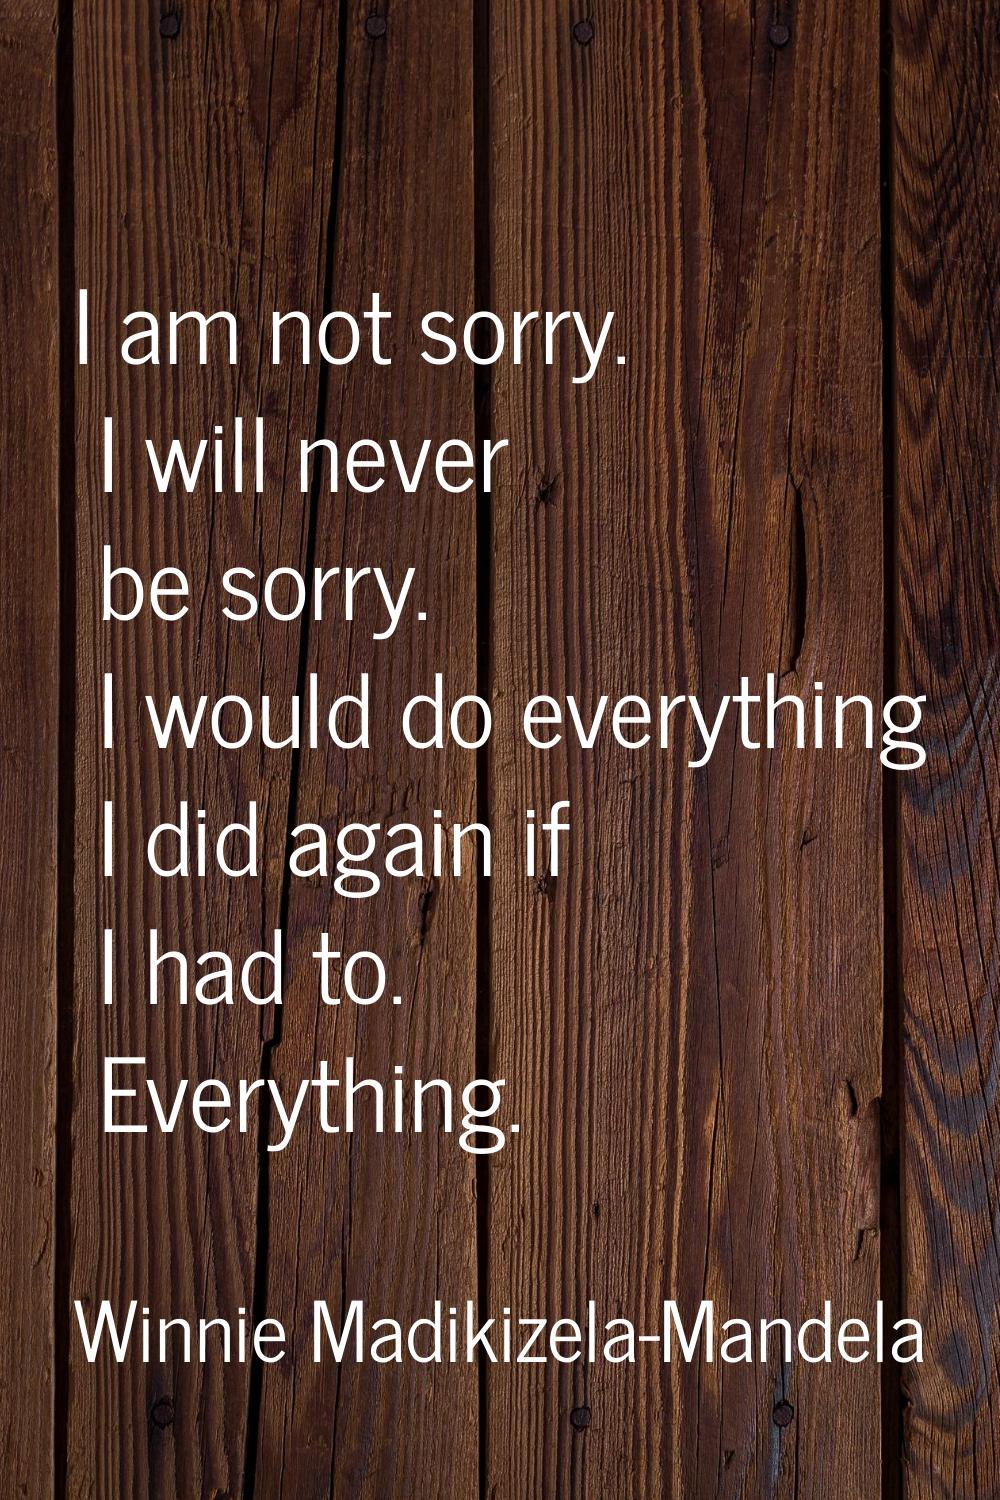 I am not sorry. I will never be sorry. I would do everything I did again if I had to. Everything.